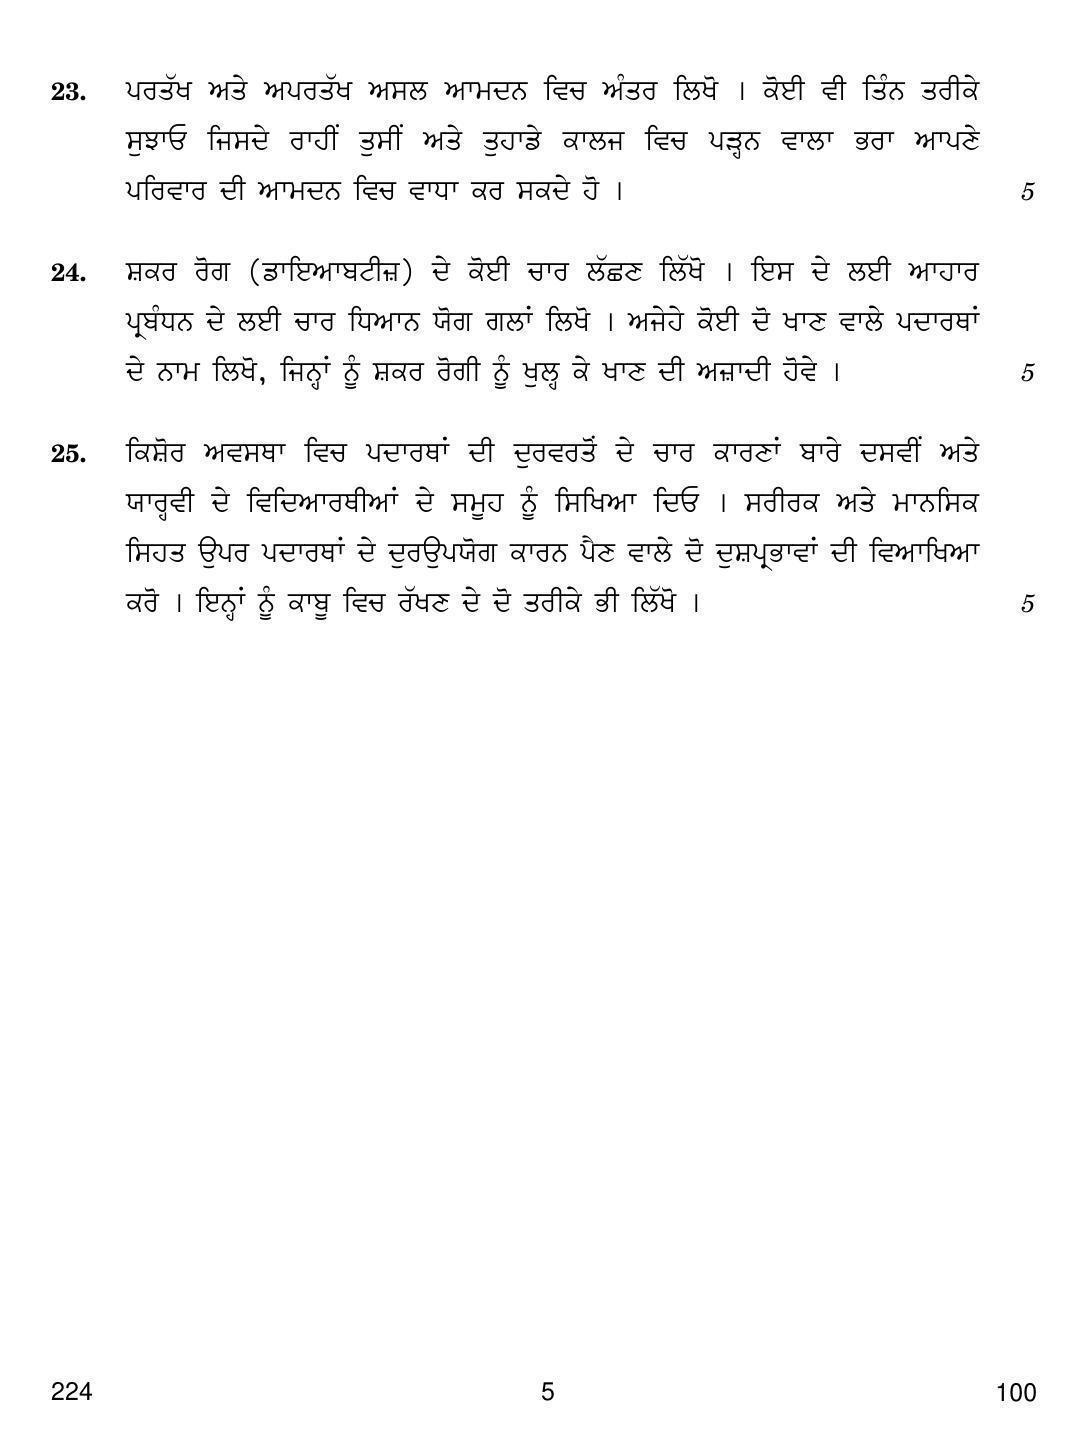 CBSE Class 12 224 HOME SCIENCE PUNJABI VERSION 2018 Question Paper - Page 5